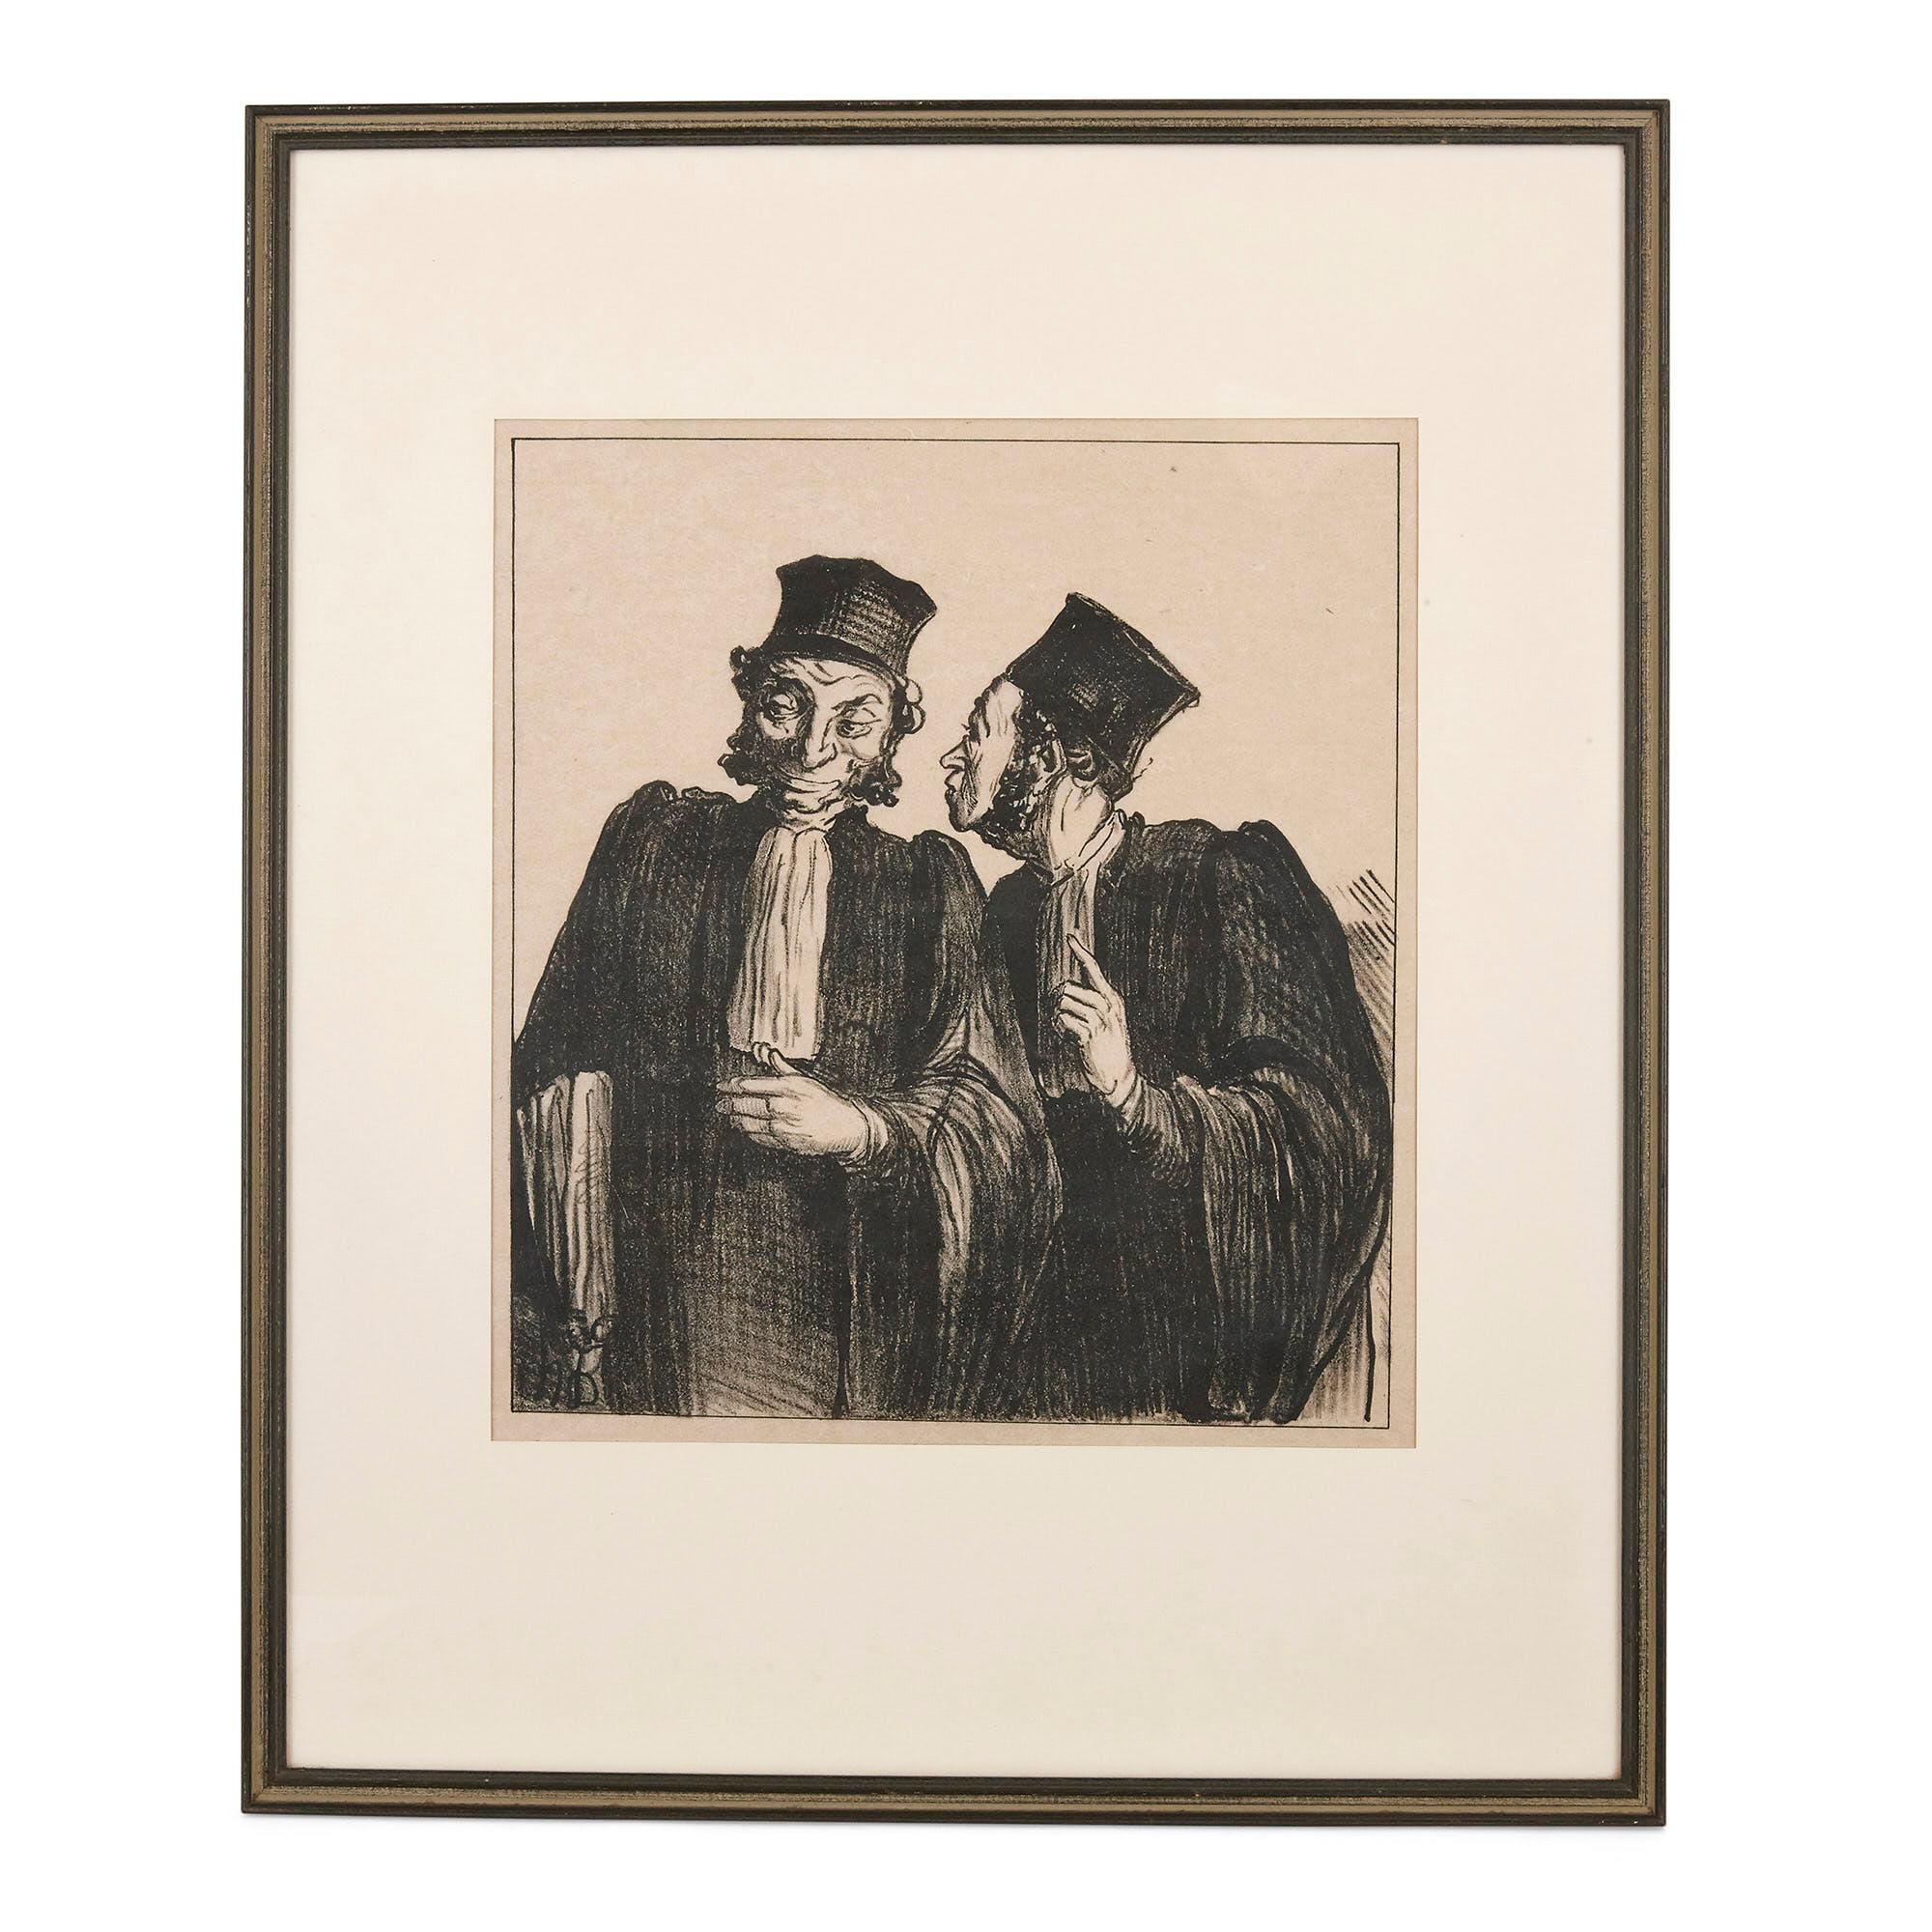 Two lawyers from 'Croquis Parisiens'